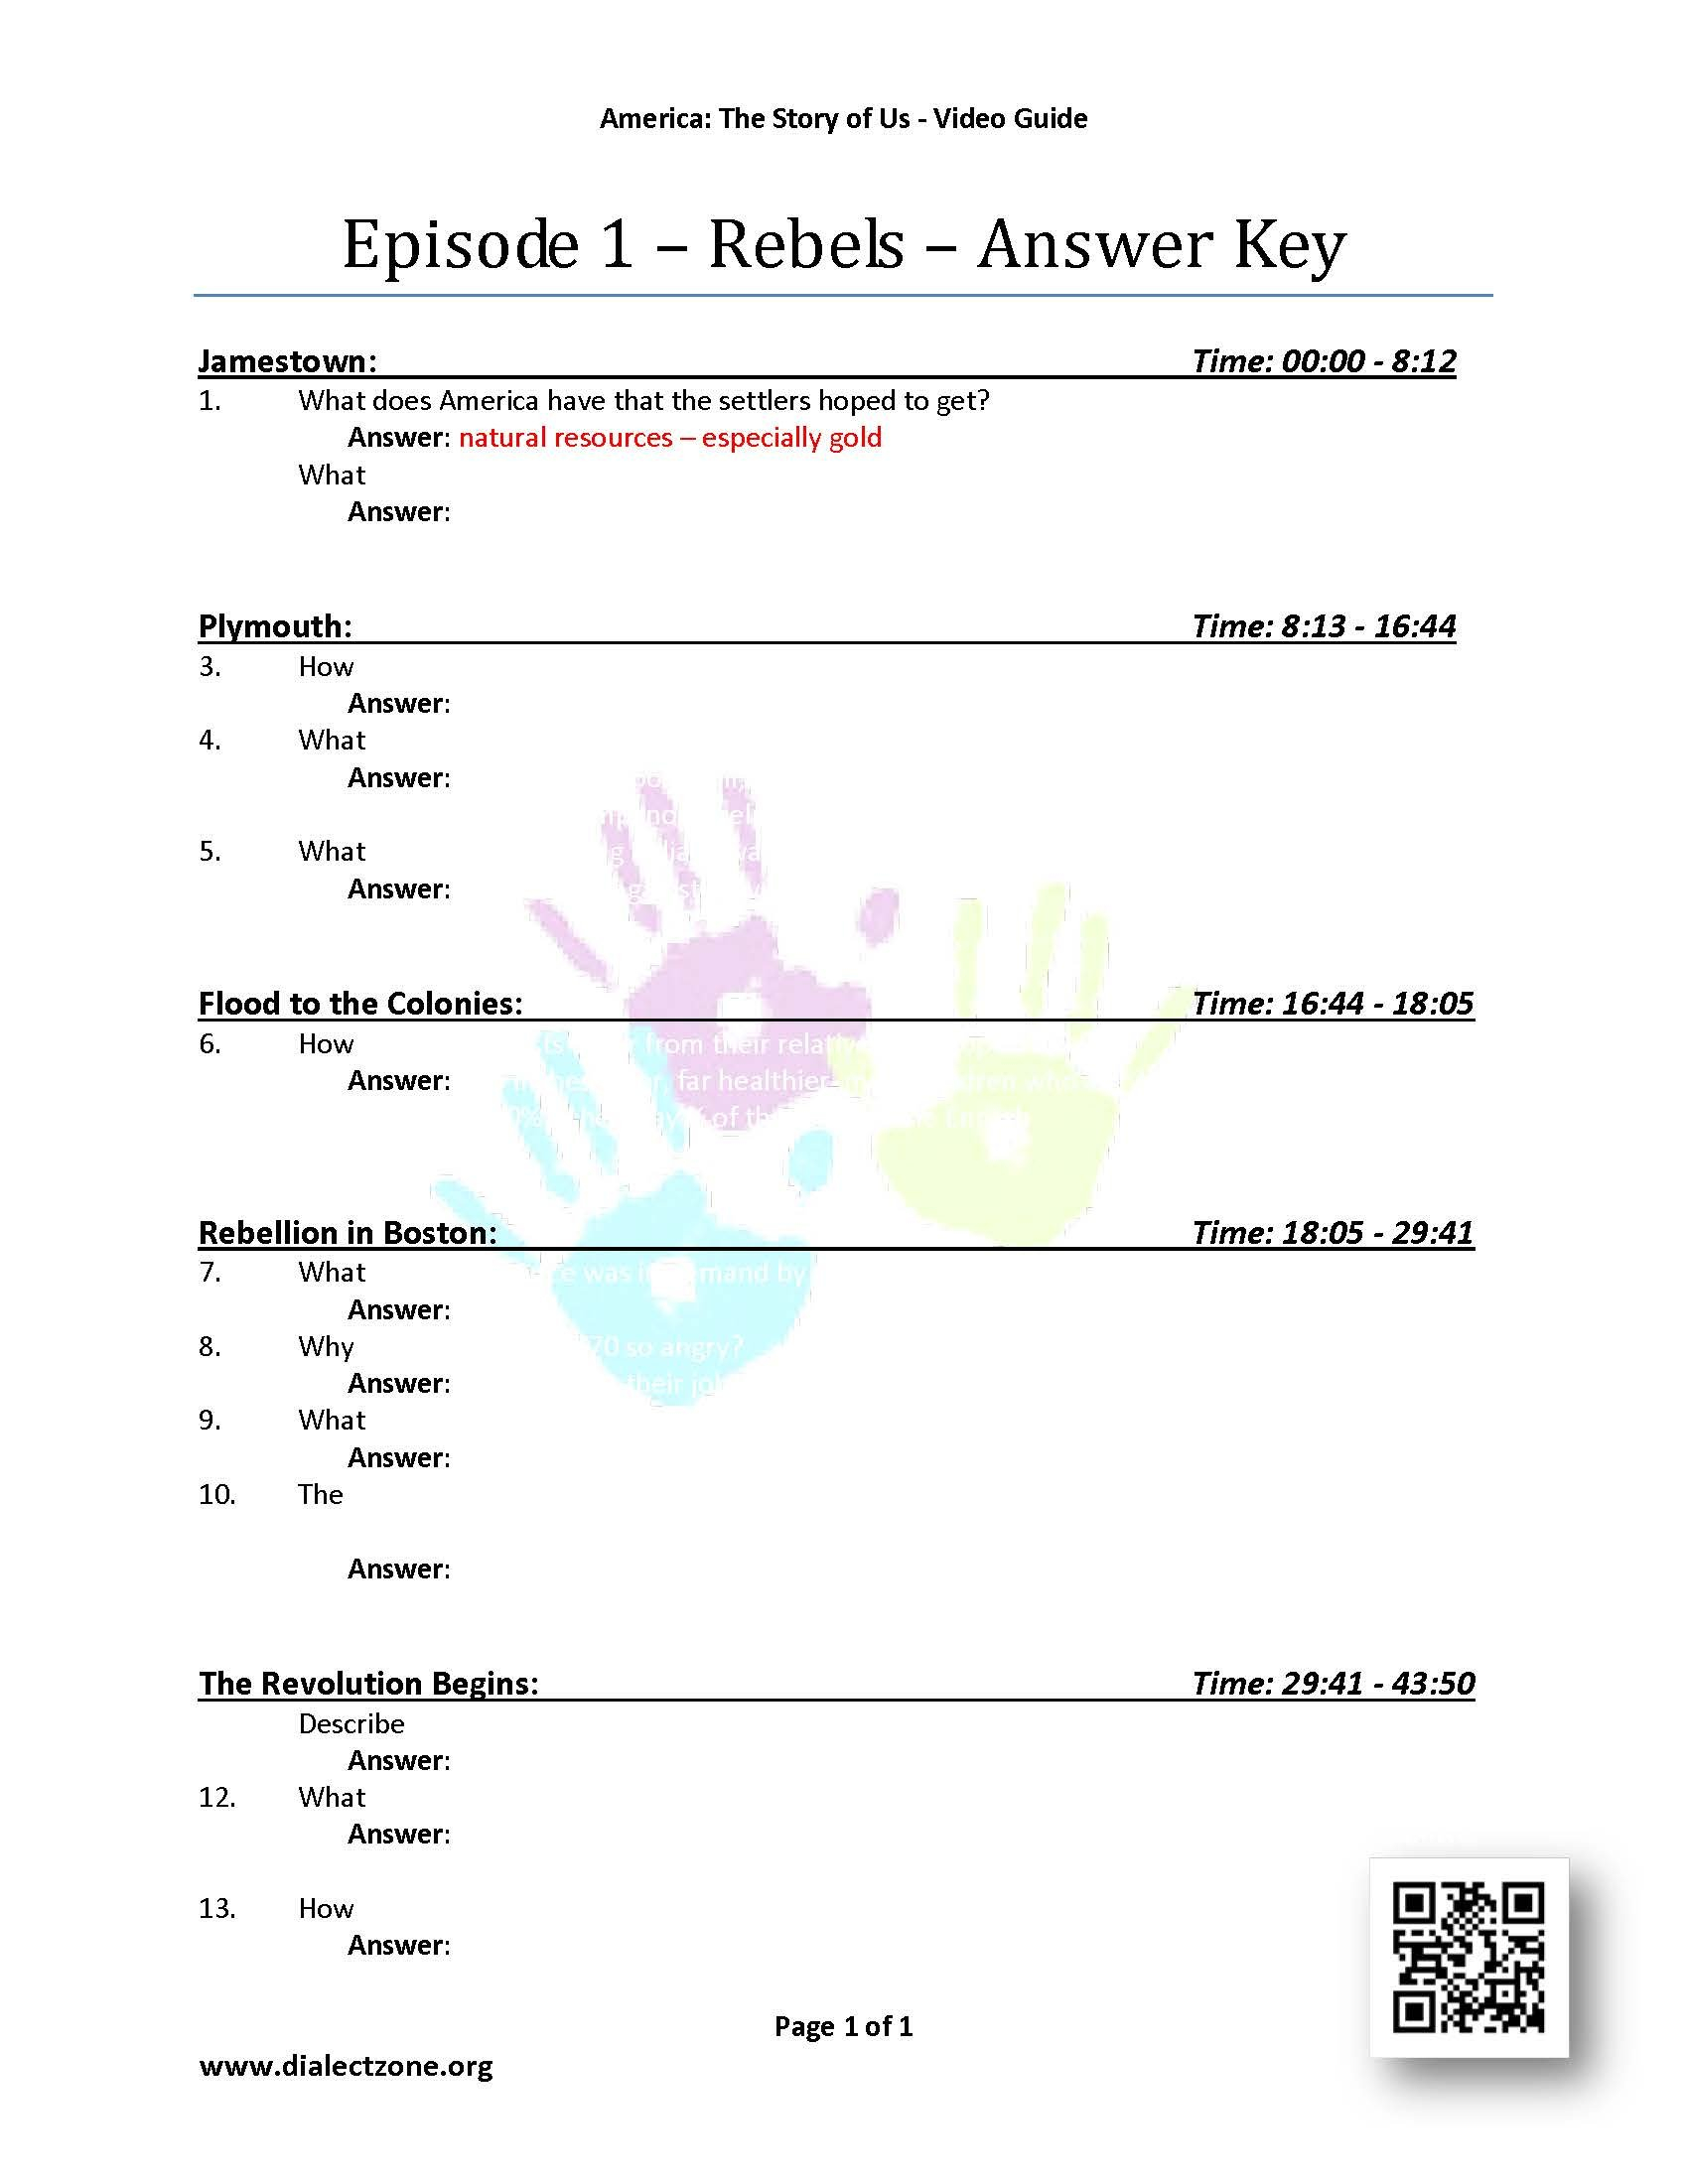 Episode 1  Rebels  Answer Keys Atsouep1Key  199  Dialect With America The Story Of Us Rebels Worksheet Answers